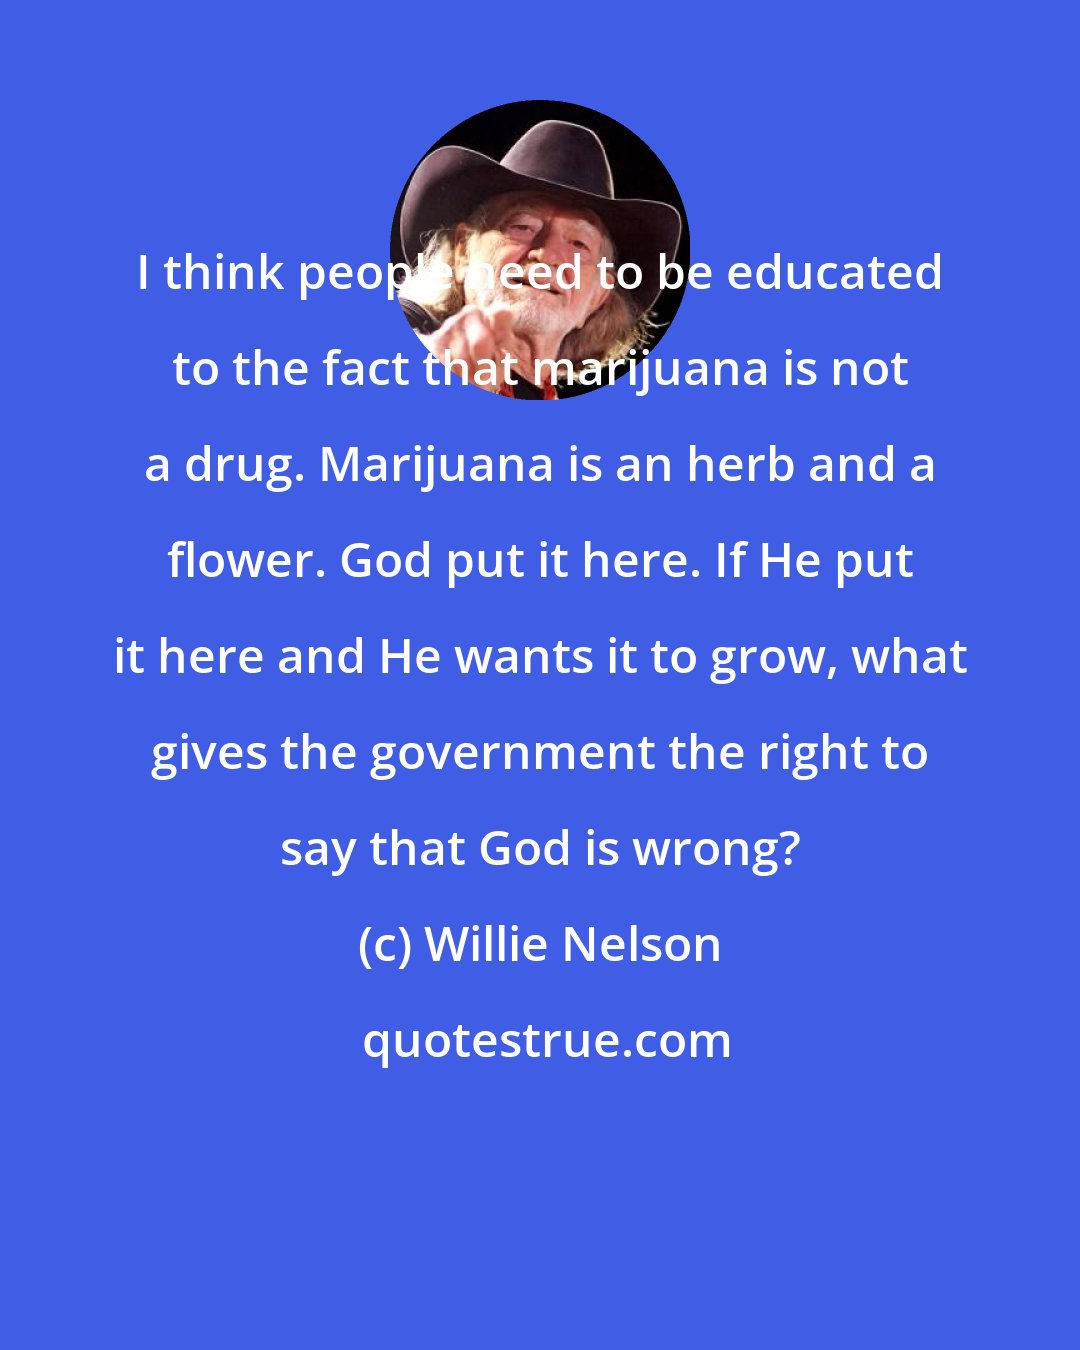 Willie Nelson: I think people need to be educated to the fact that marijuana is not a drug. Marijuana is an herb and a flower. God put it here. If He put it here and He wants it to grow, what gives the government the right to say that God is wrong?